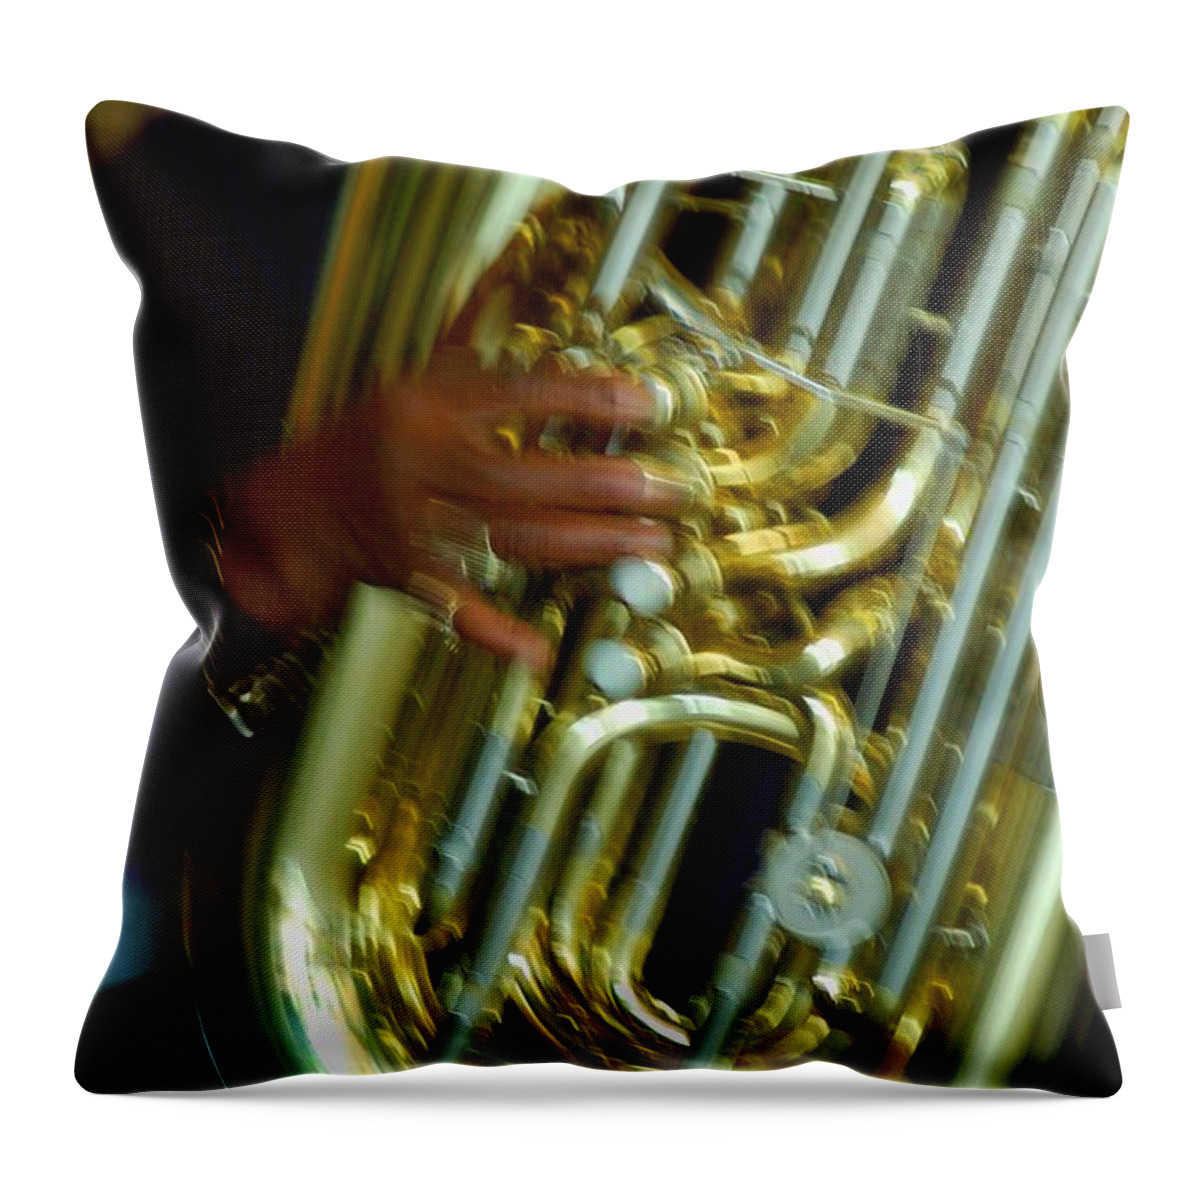 Excelsior Band Throw Pillow featuring the digital art Excelsior Band Tuba by Michael Thomas